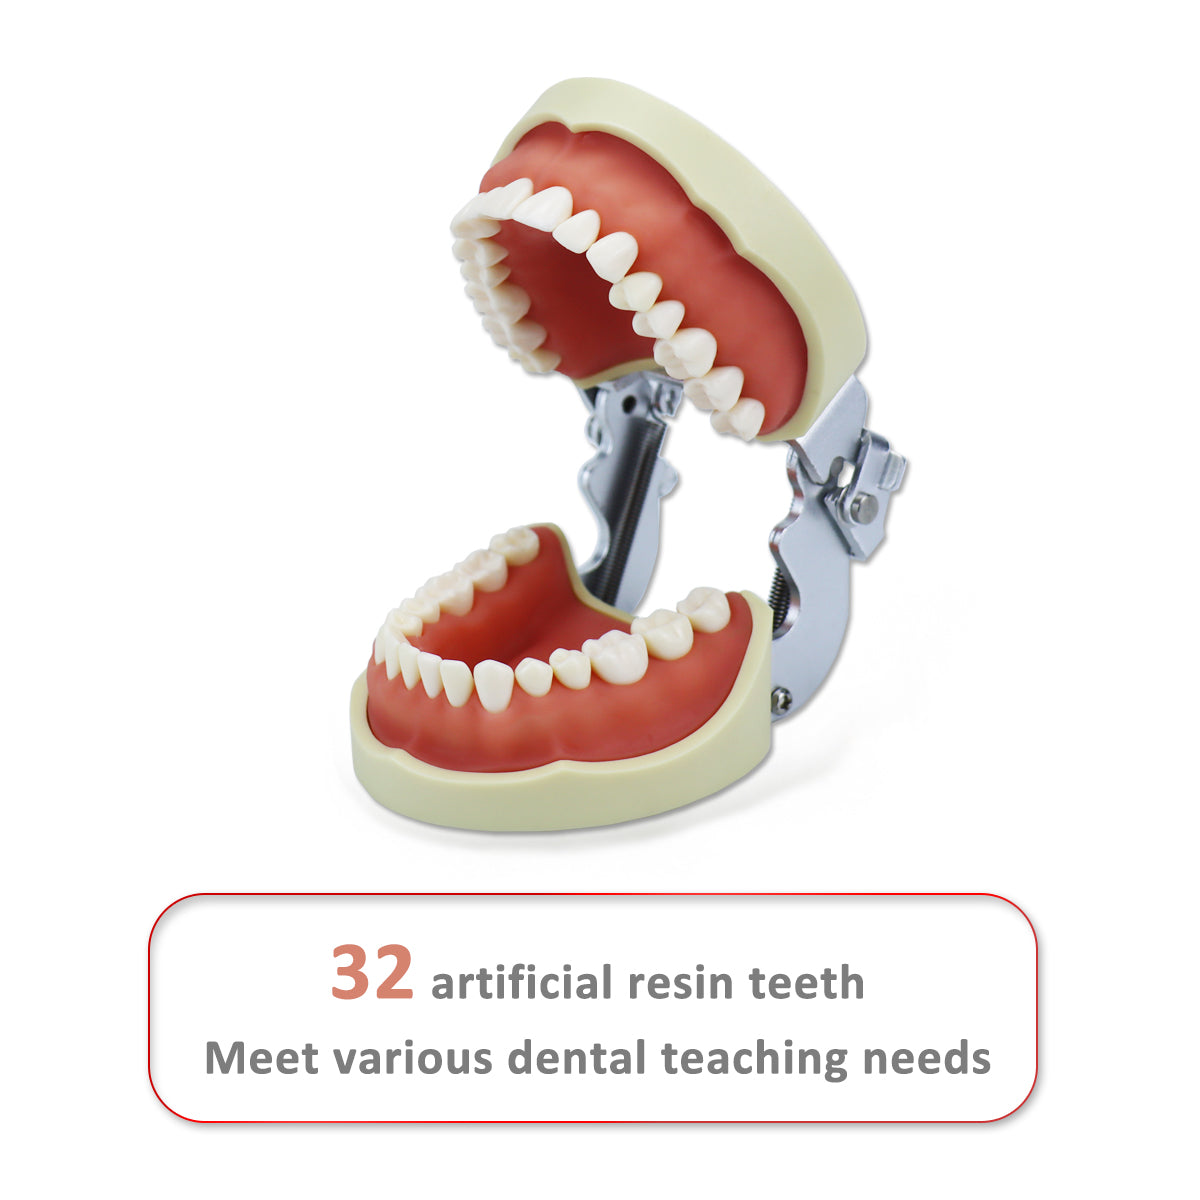 D-PP32 Removable Dental Model Tooth Arrangement Practice Model With 32 pcs Dental Granule and Screw Teaching Simulation